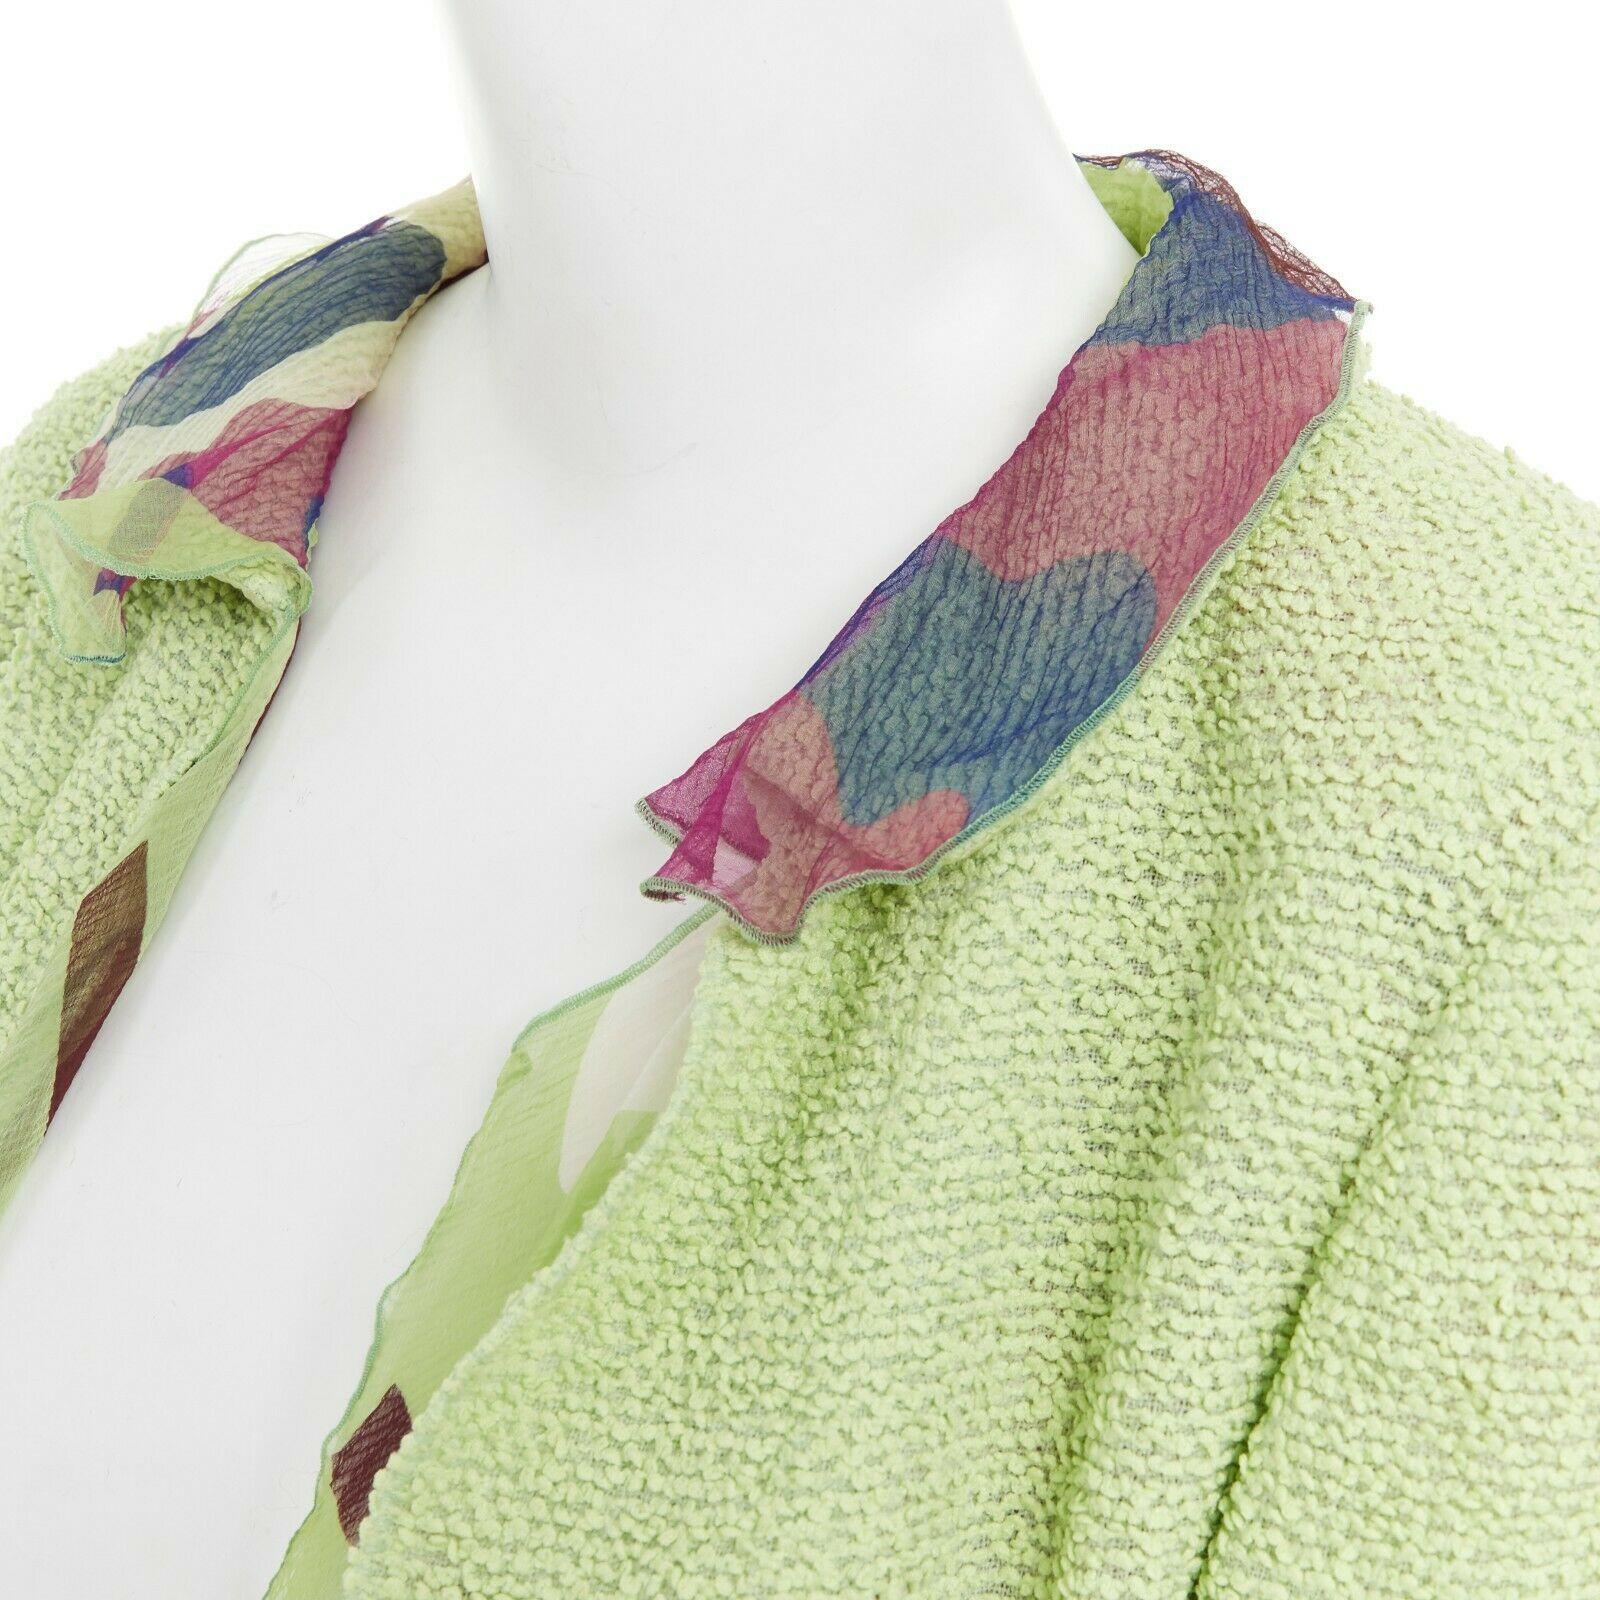 CHANEL 00T lime green wool tweed printed floral silk trimmed cropped jacket FR40

CHANEL
FROM THE 2000 TRANSITION COLLECTION
Wool, nylon blend. Lime green textured upper. Rounded shoulder. Slit pockets. Open front. Multicolor floral print exposed